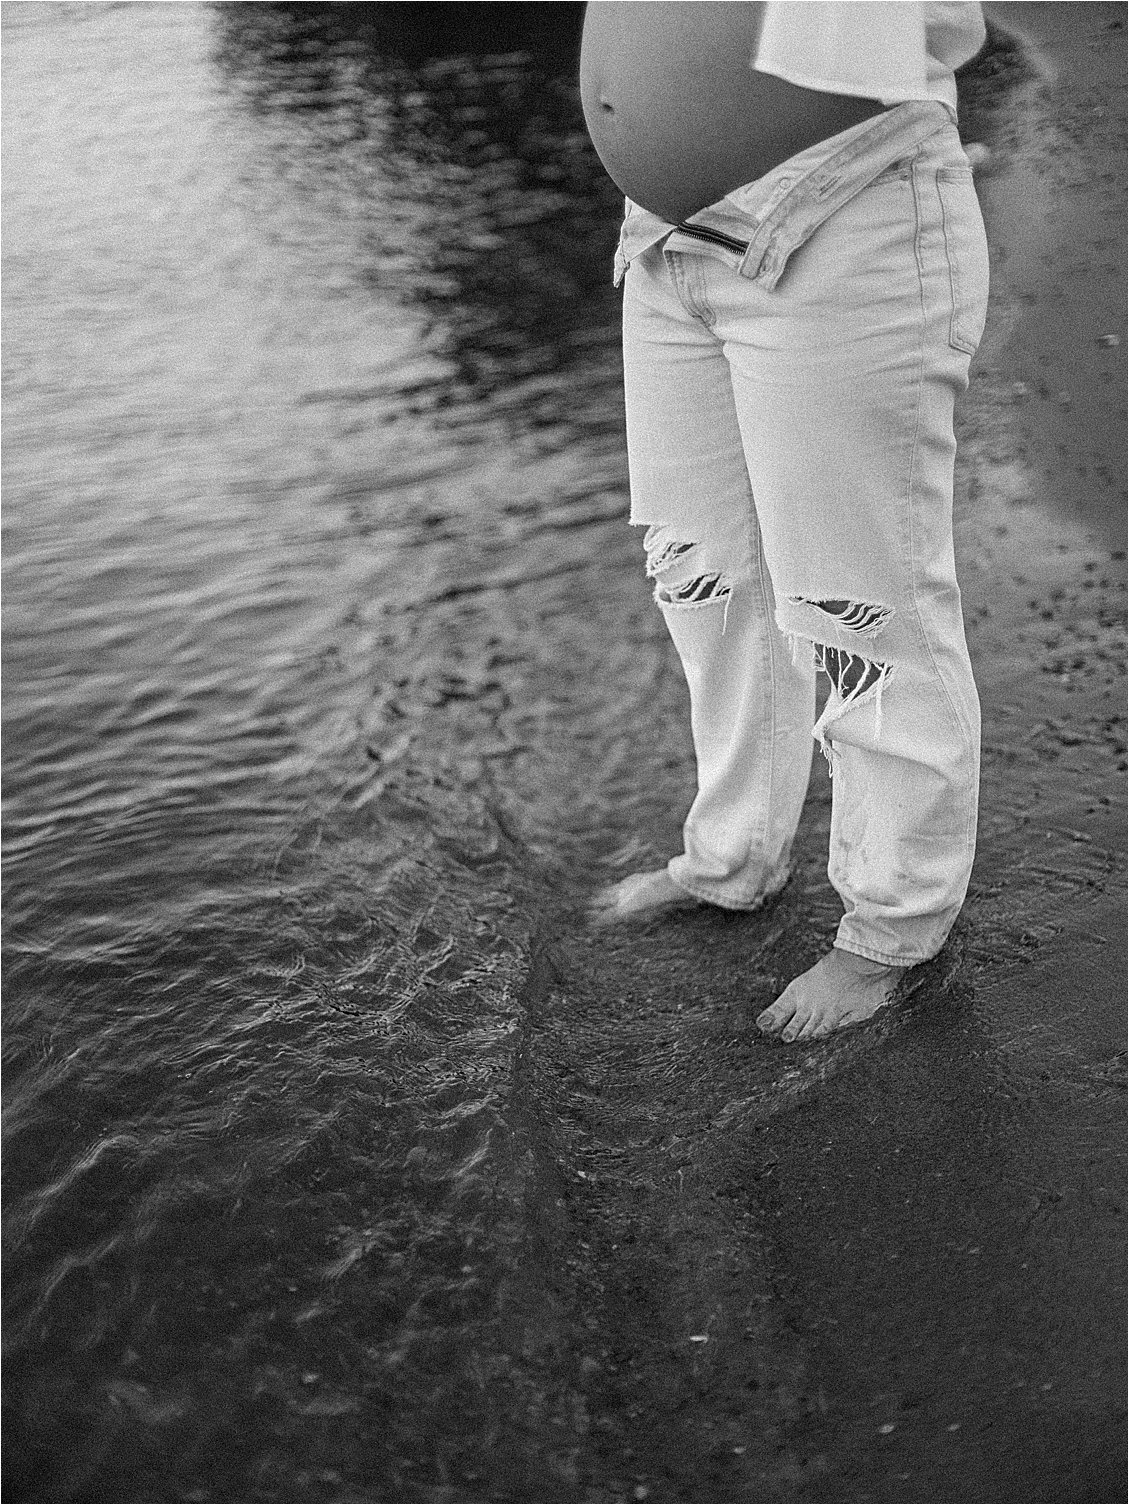 Cozy Casual Maternity Session on the Bay with Annapolis Film Photographer, Renee Hollingshead